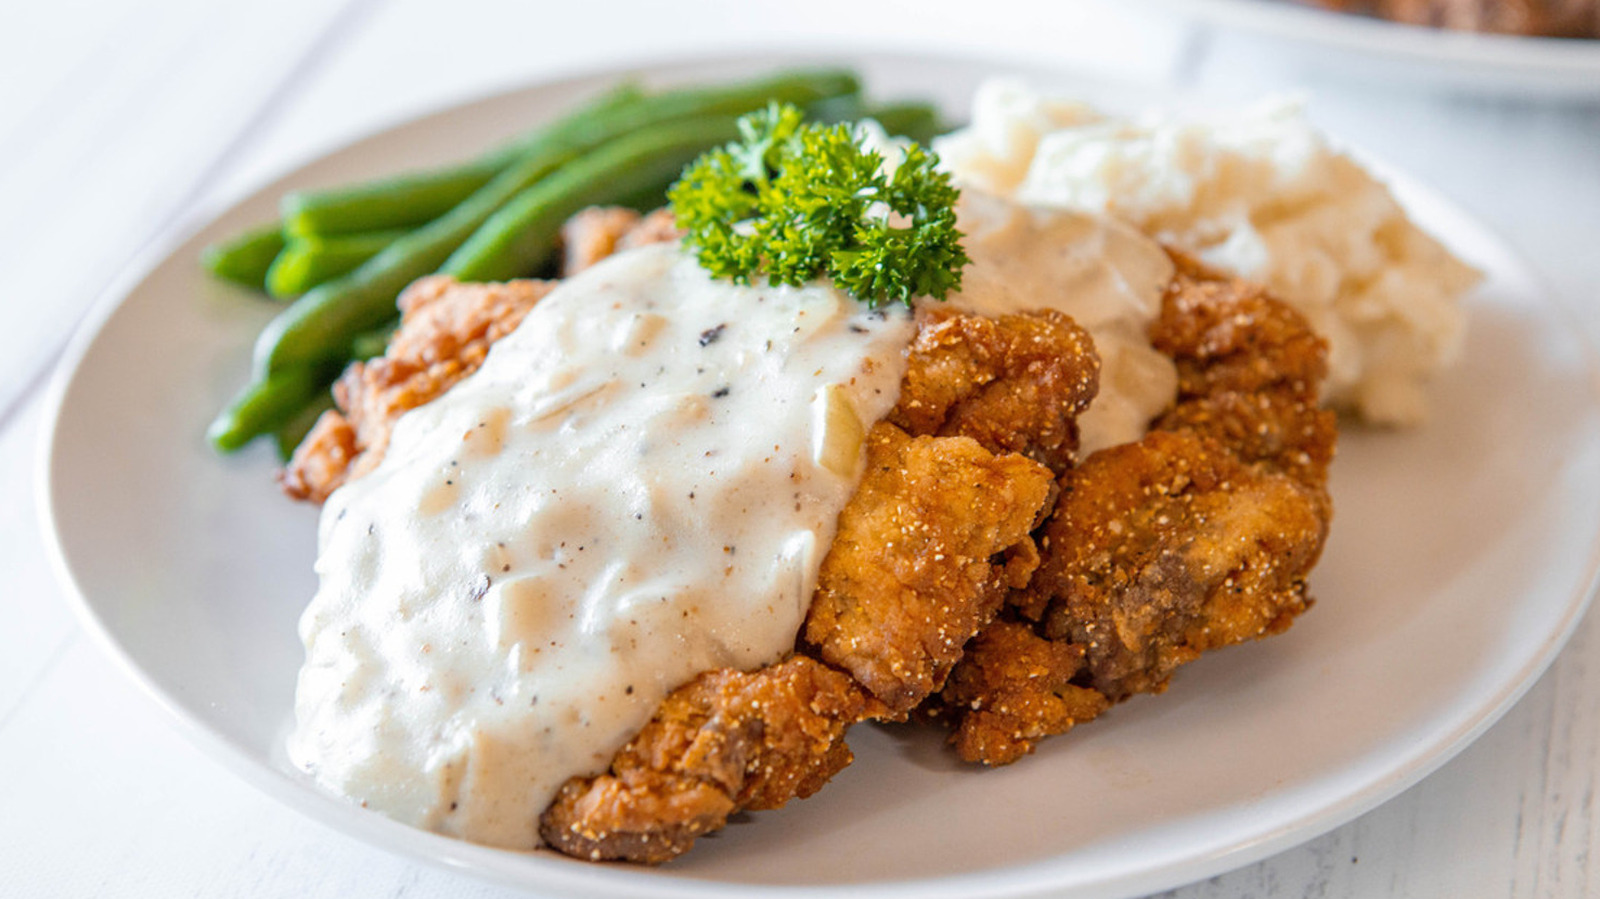 Is There An Ideal Cut Of Meat For Chicken Fried Steak?